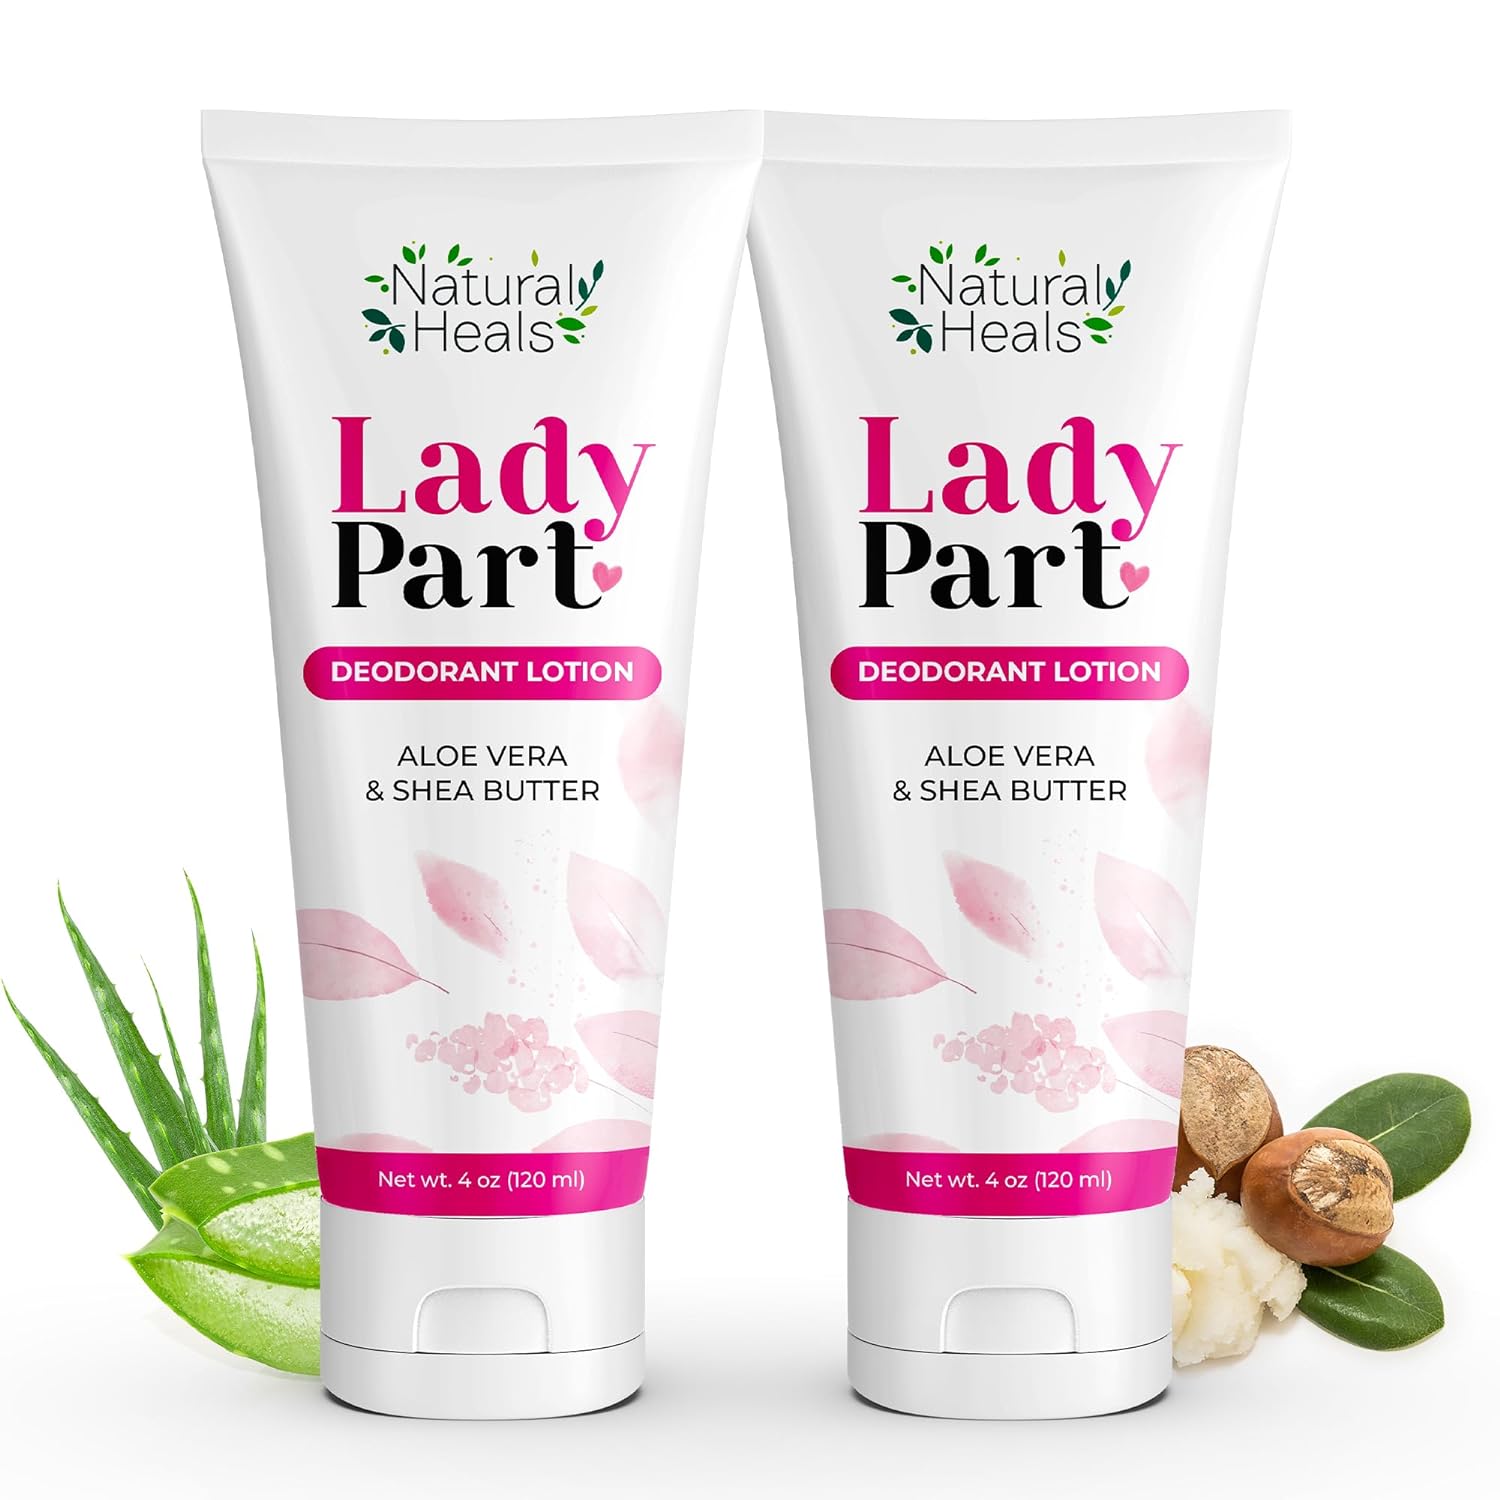 I've been using a different brand (L) that is very expensive, in my opinion, so I decided to shop around. Based on reviews I ordered Lady Parts and I'm very pleased. The other brand I used smelled funky no matter which scent I tried, and the coconut burned. This product smells fresh and clean. I have used it for a few days and it gets me through the day feeling clean and fresh with no odor in the downstairs department from sitting all day at work. The scent seems to dissipate rather than stick a